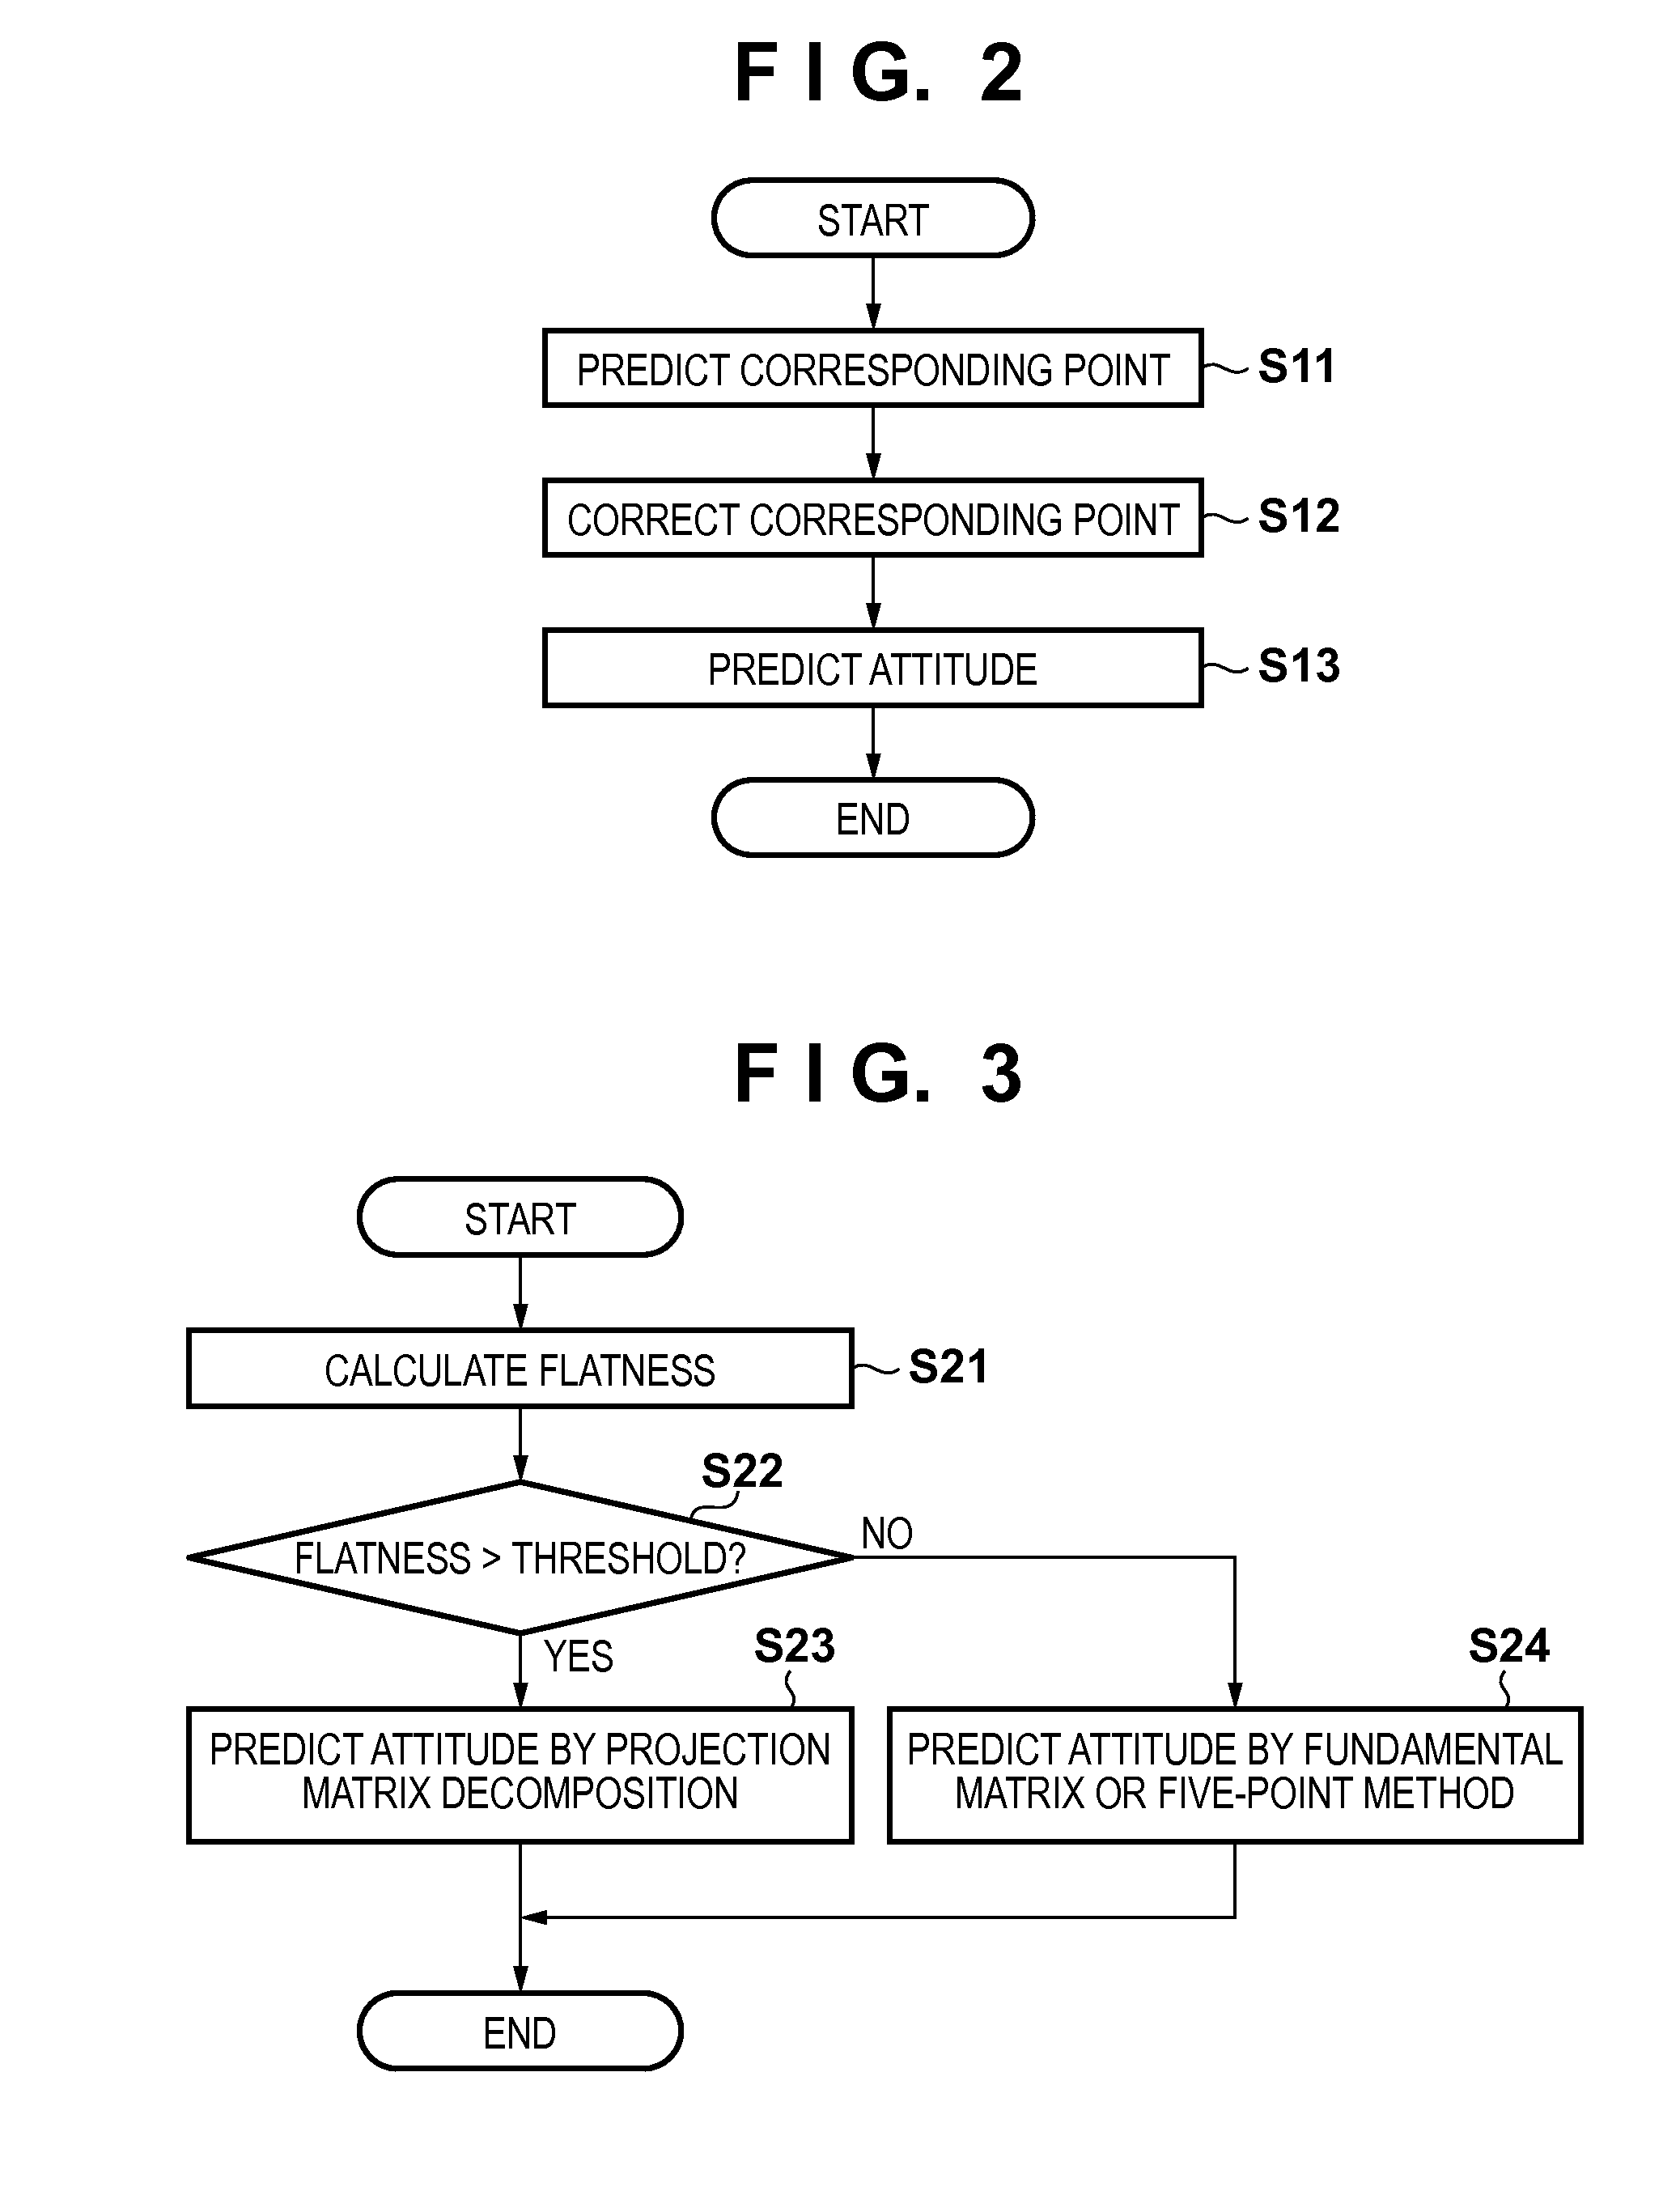 Image processing apparatus and method, and image capturing apparatus